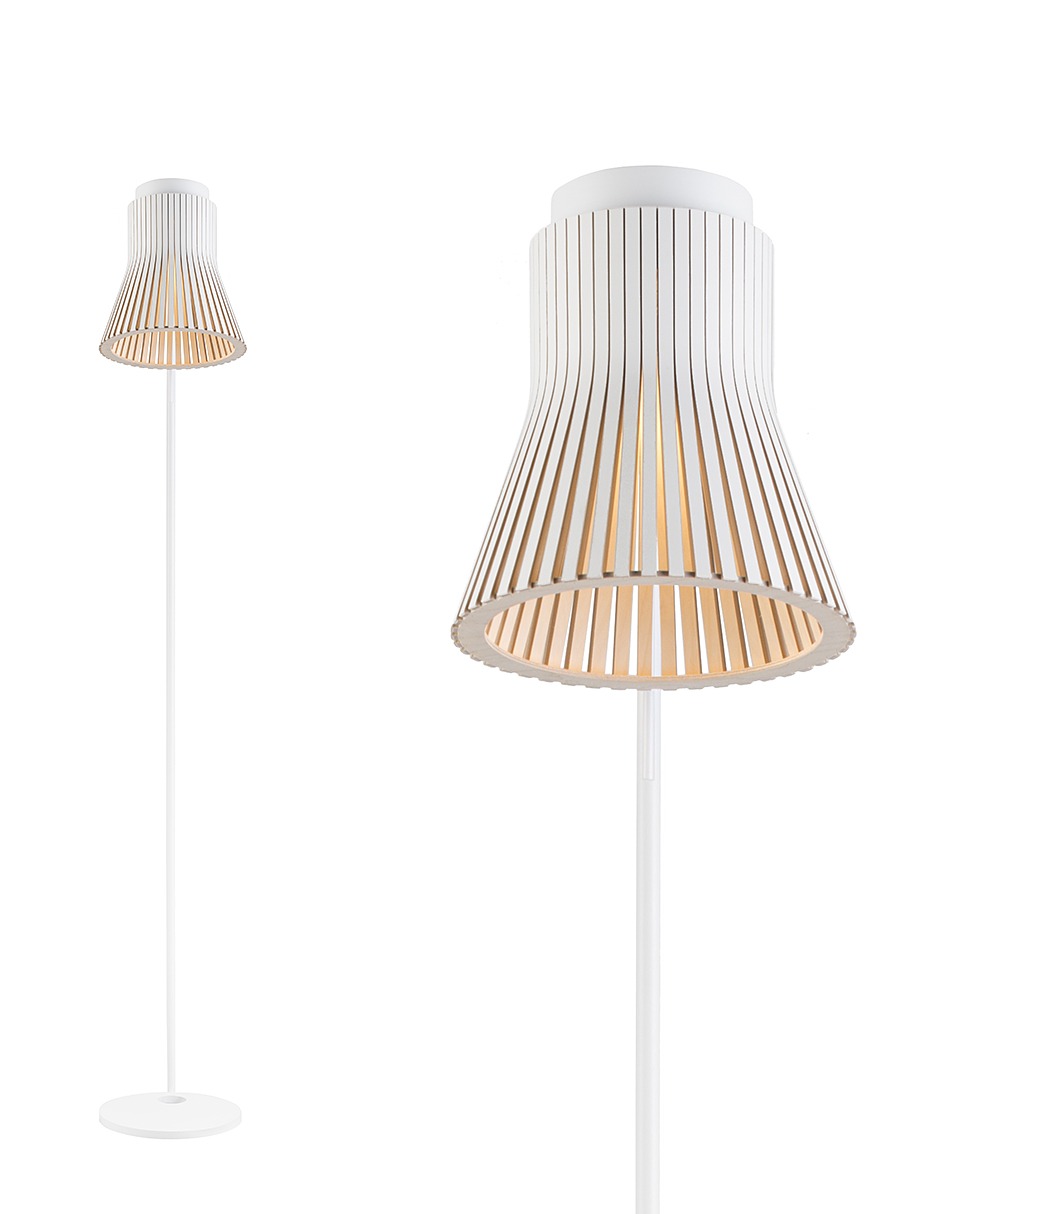 Petite 4610 floor lamp is available in white laminated